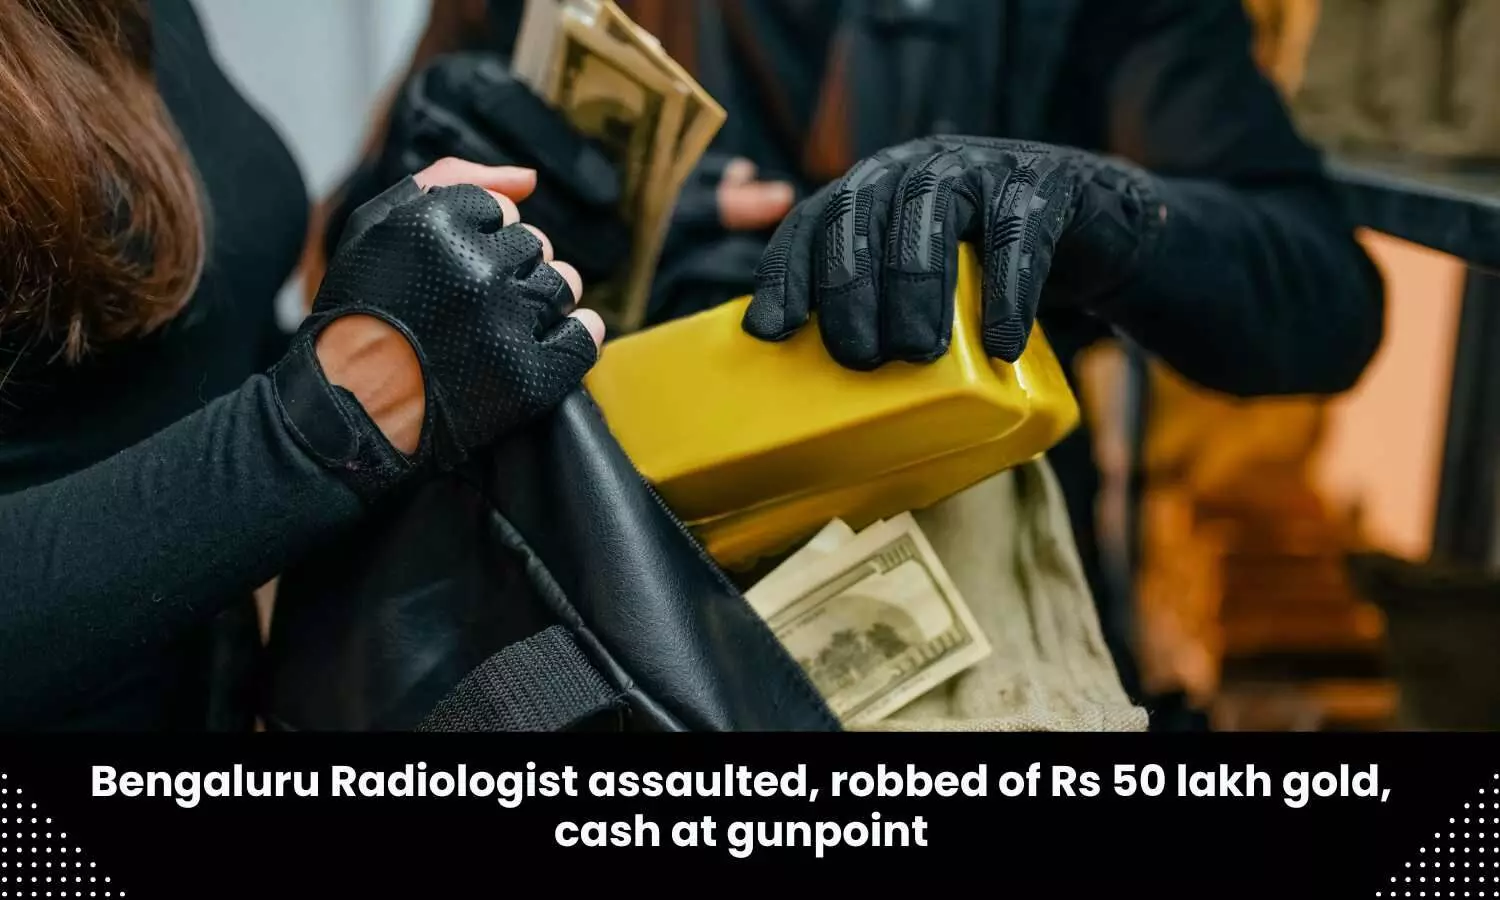 Radiologist robbed of Rs 50 lakh gold, cash at gunpoint